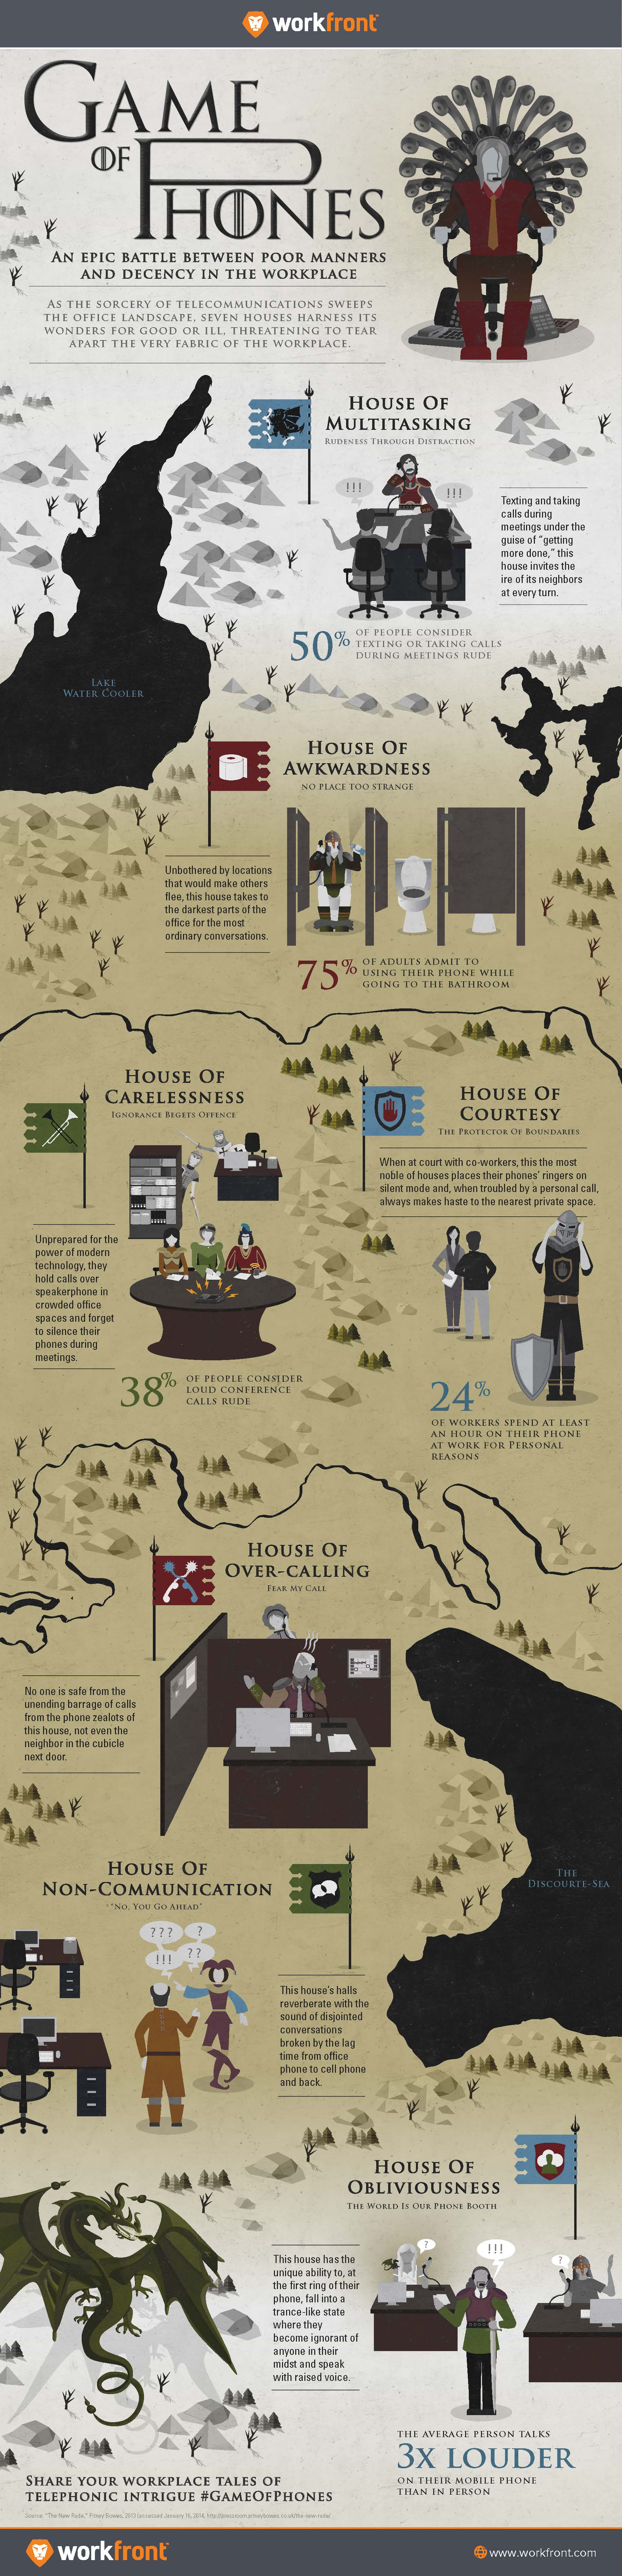 game-of-phones-infographic